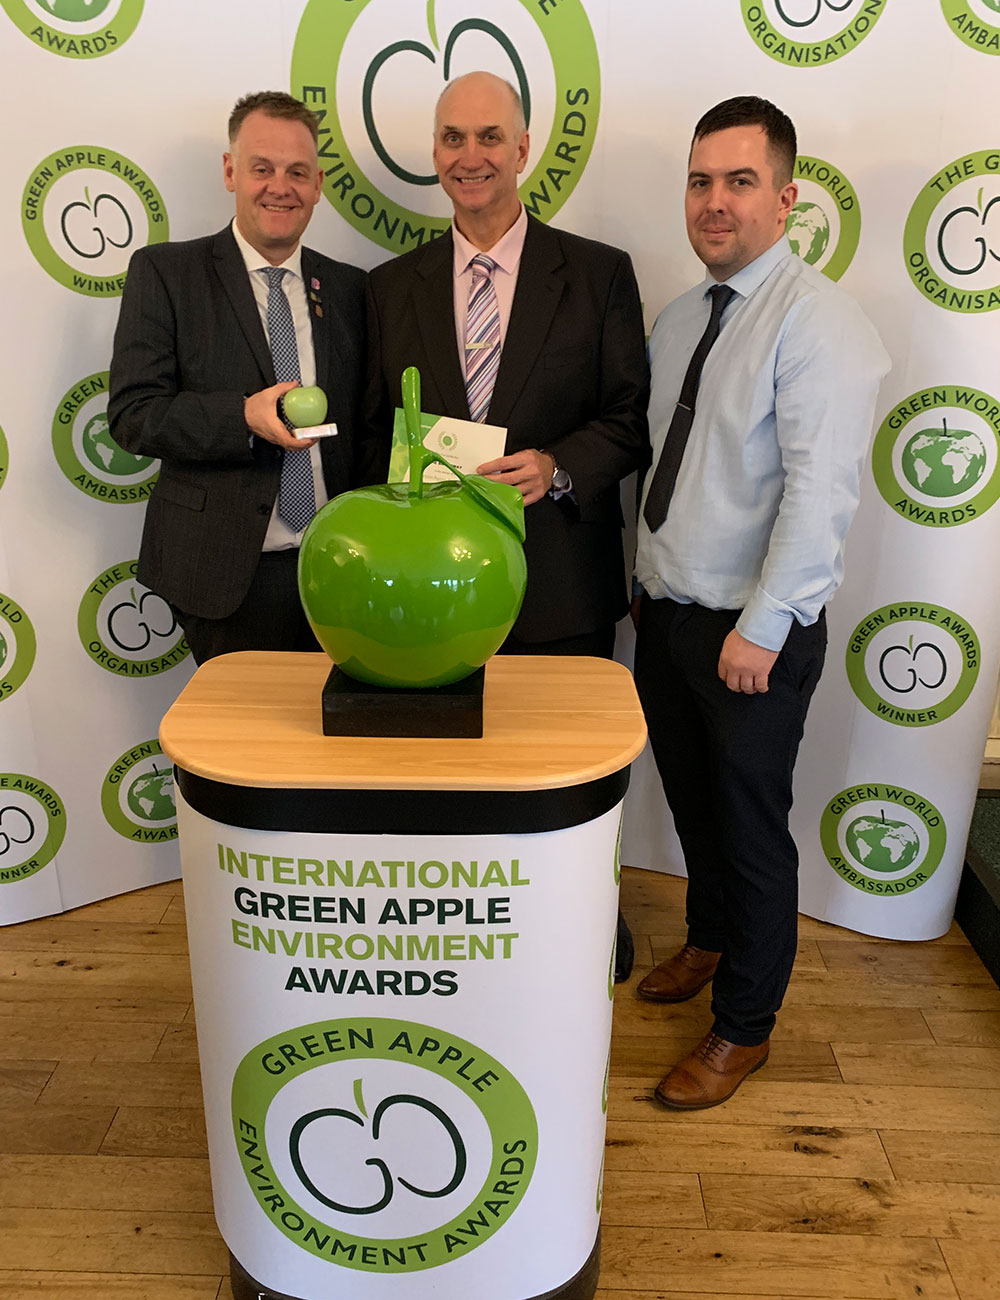 The Broadway Green Apple Winners with their award